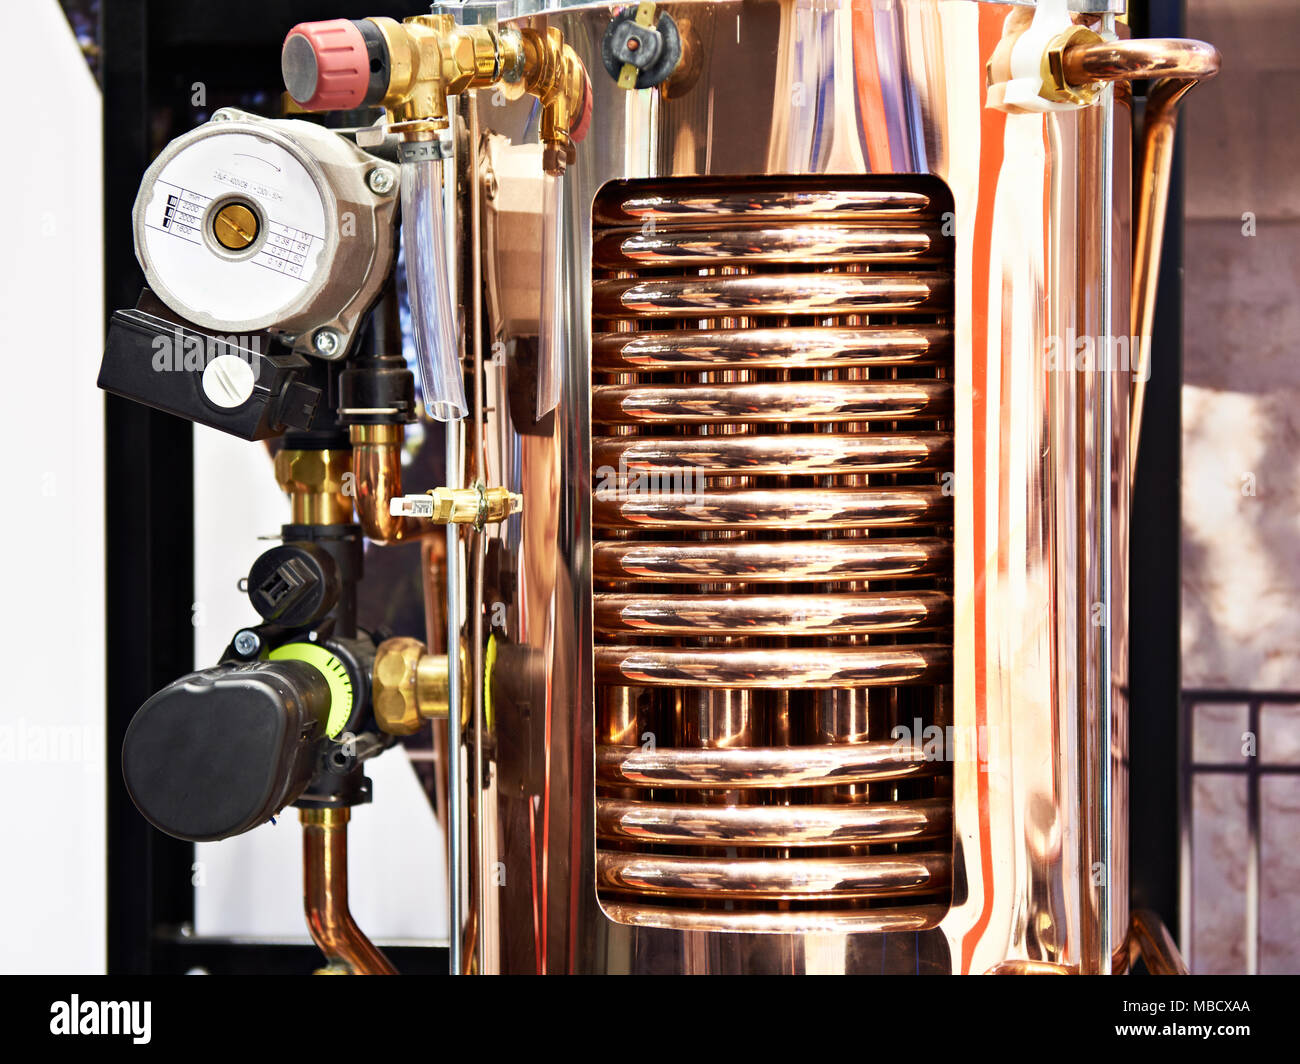 Copper Pipe Radiator High Resolution Stock Photography and Images - Alamy